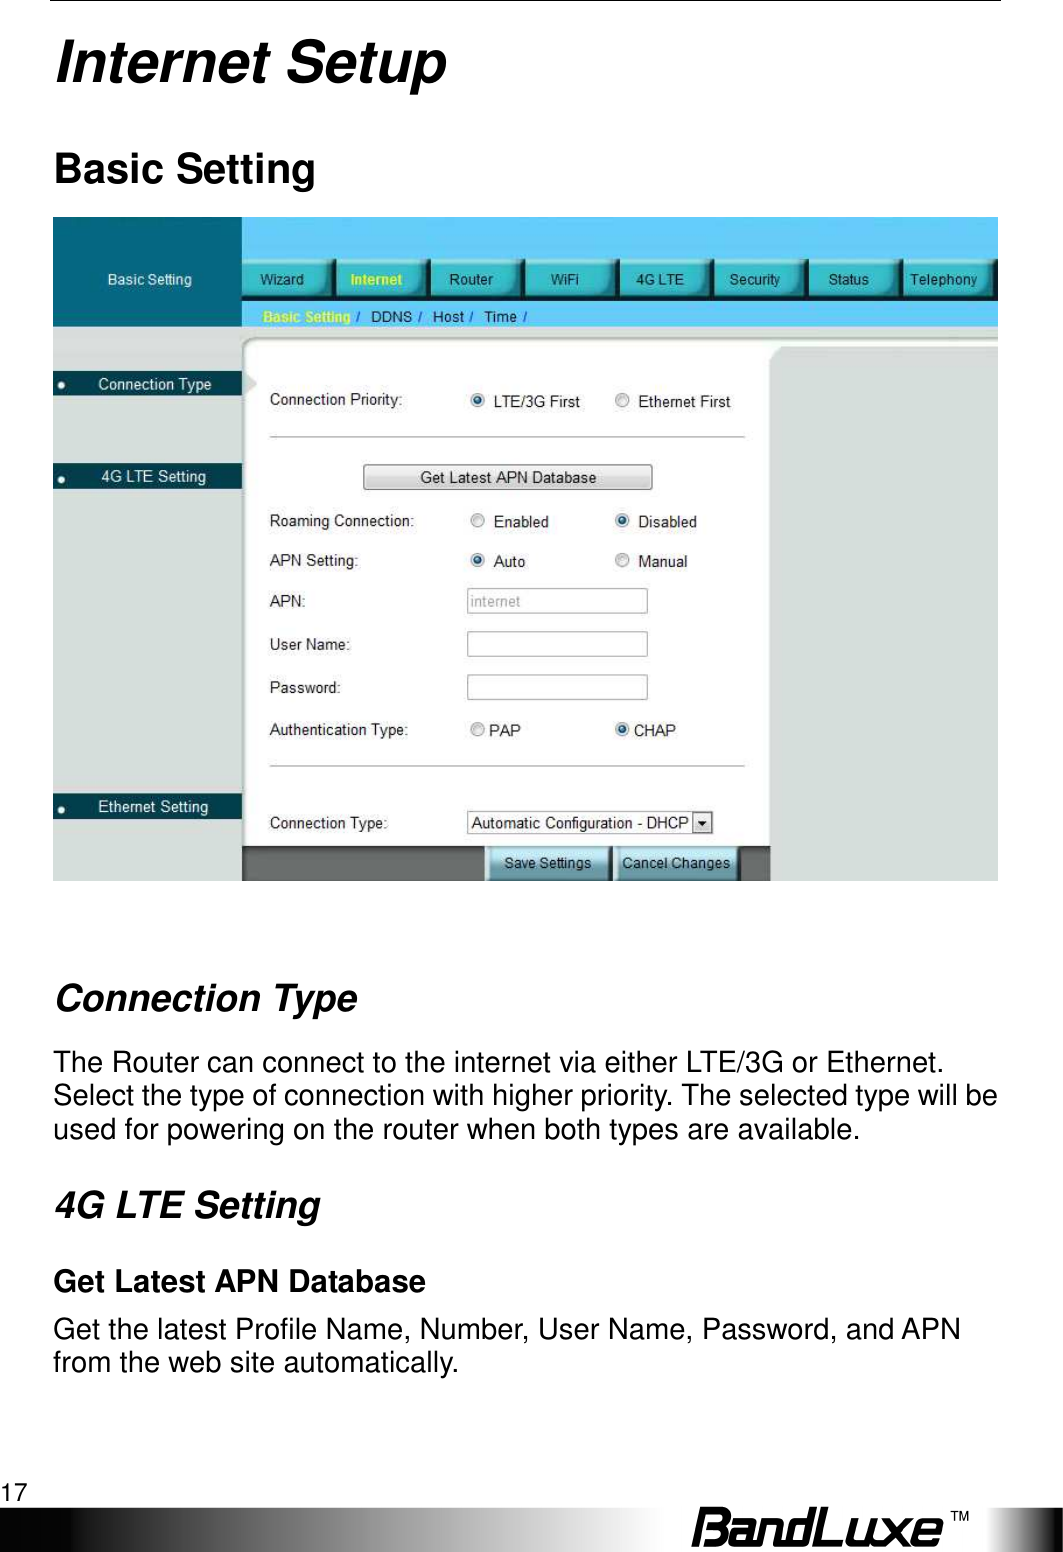   Internet Setup 17 Internet Setup Basic Setting   Connection Type The Router can connect to the internet via either LTE/3G or Ethernet. Select the type of connection with higher priority. The selected type will be used for powering on the router when both types are available. 4G LTE Setting Get Latest APN Database Get the latest Profile Name, Number, User Name, Password, and APN from the web site automatically. 